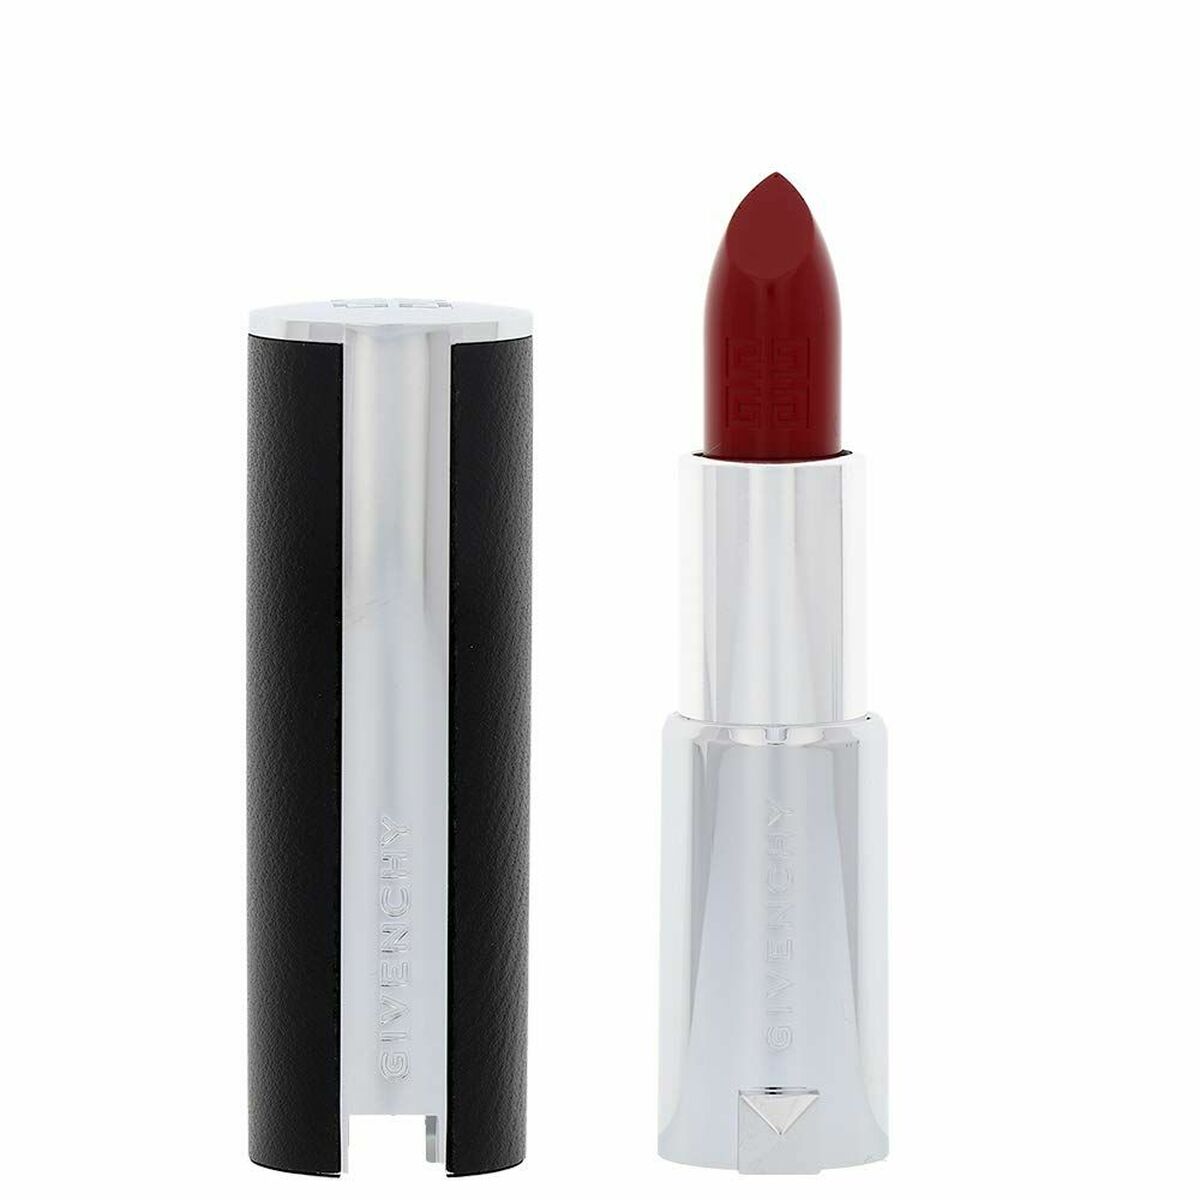 Huulipuna Givenchy le rouge huulet n307 3,4 g